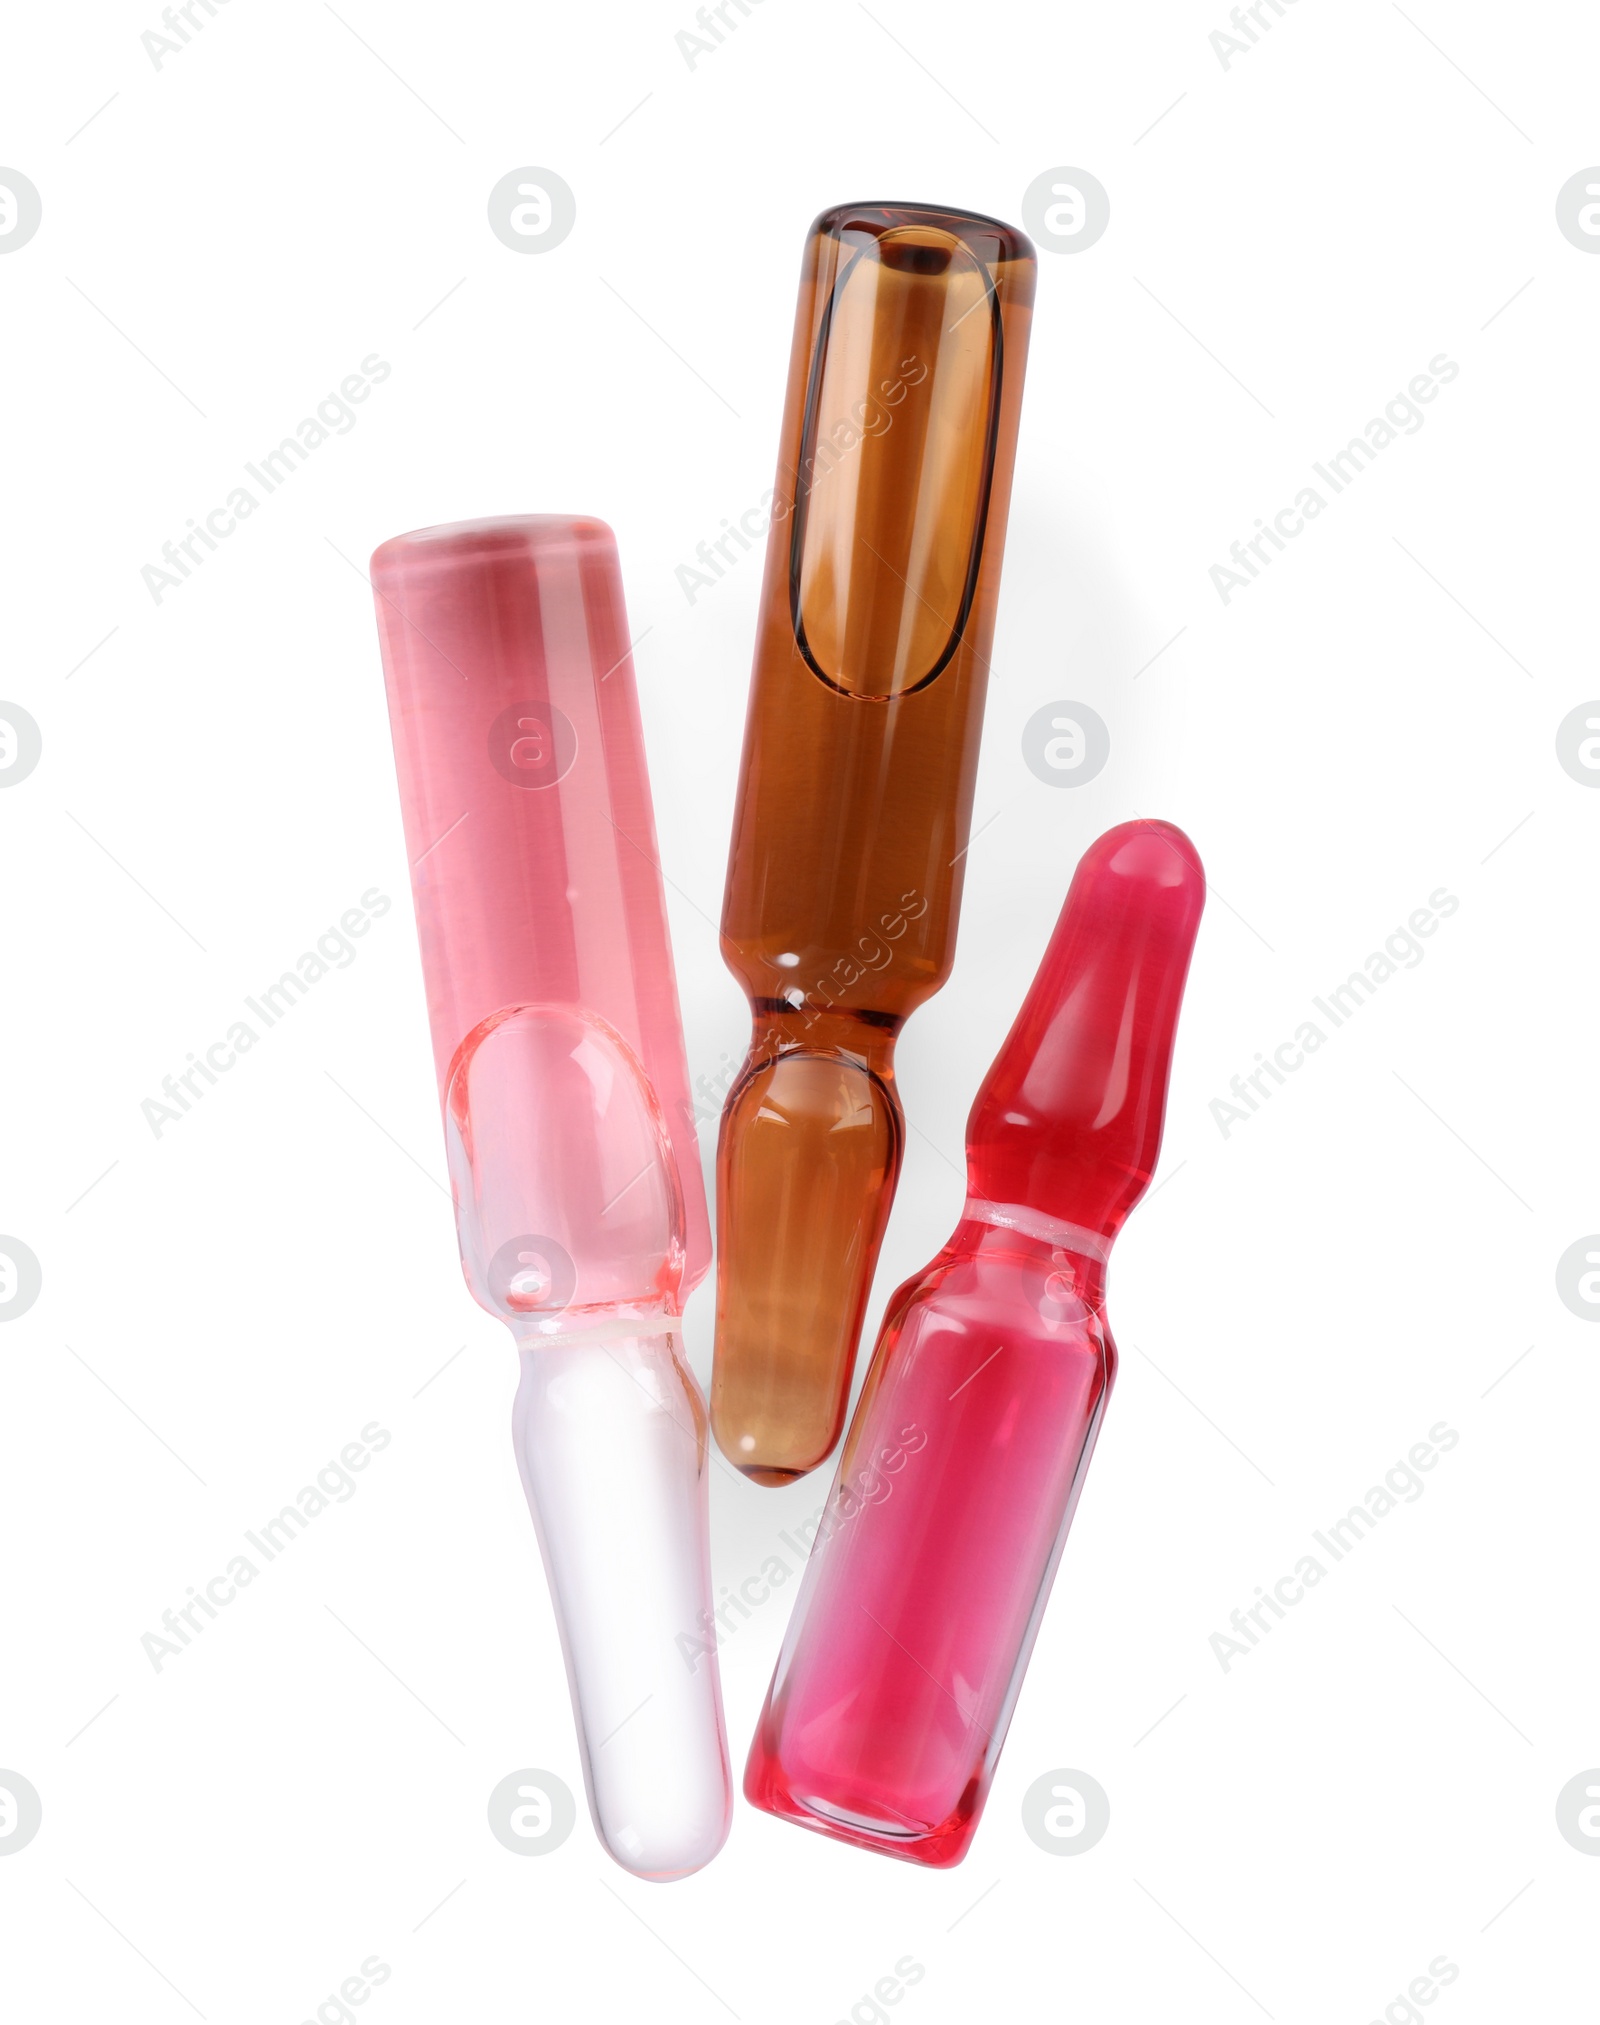 Photo of Glass ampoules with pharmaceutical products on white background, top view